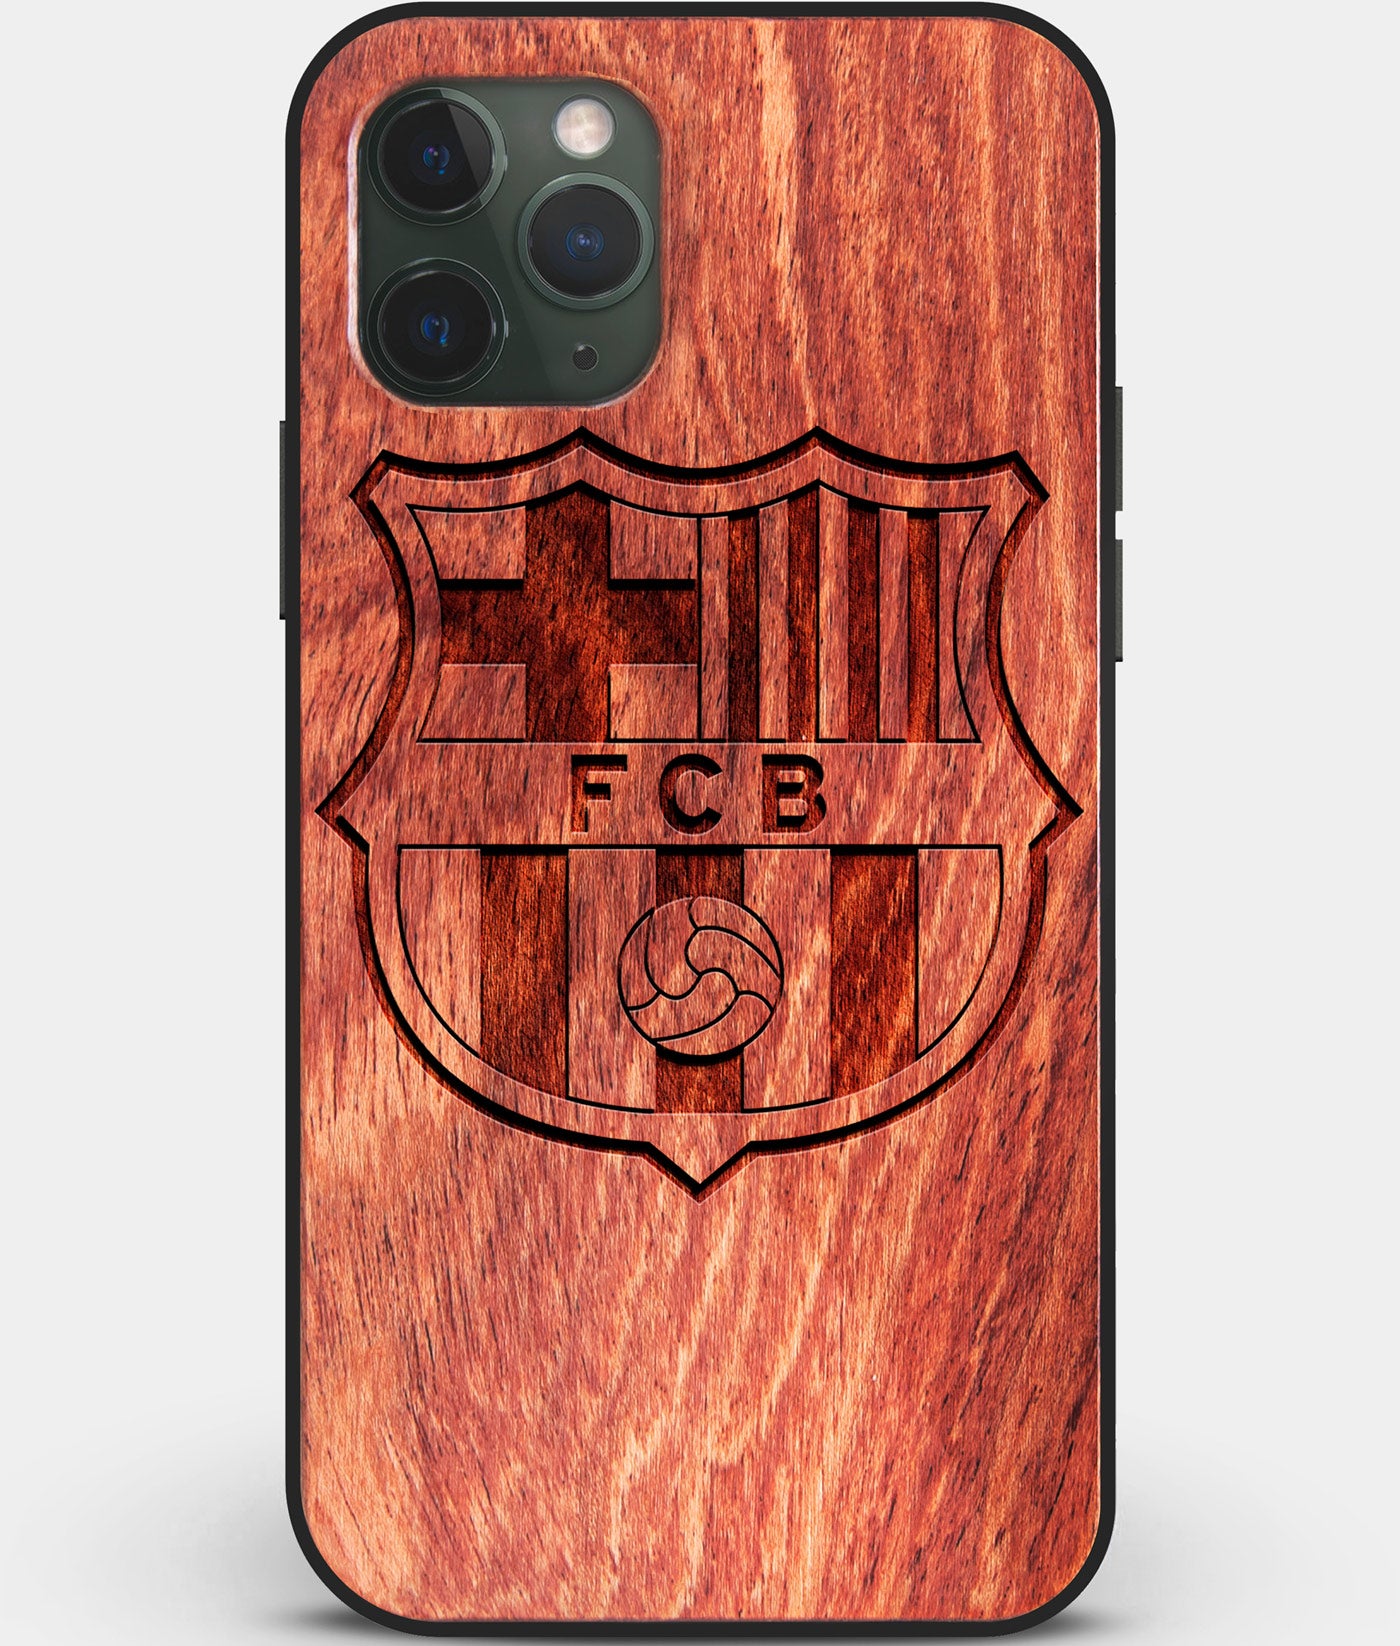 Custom Carved Wood FC Barcelona iPhone 11 Pro Max Case | Personalized Mahogany Wood FC Barcelona Cover, Birthday Gift, Gifts For Him, Monogrammed Gift For Fan | by Engraved In Nature